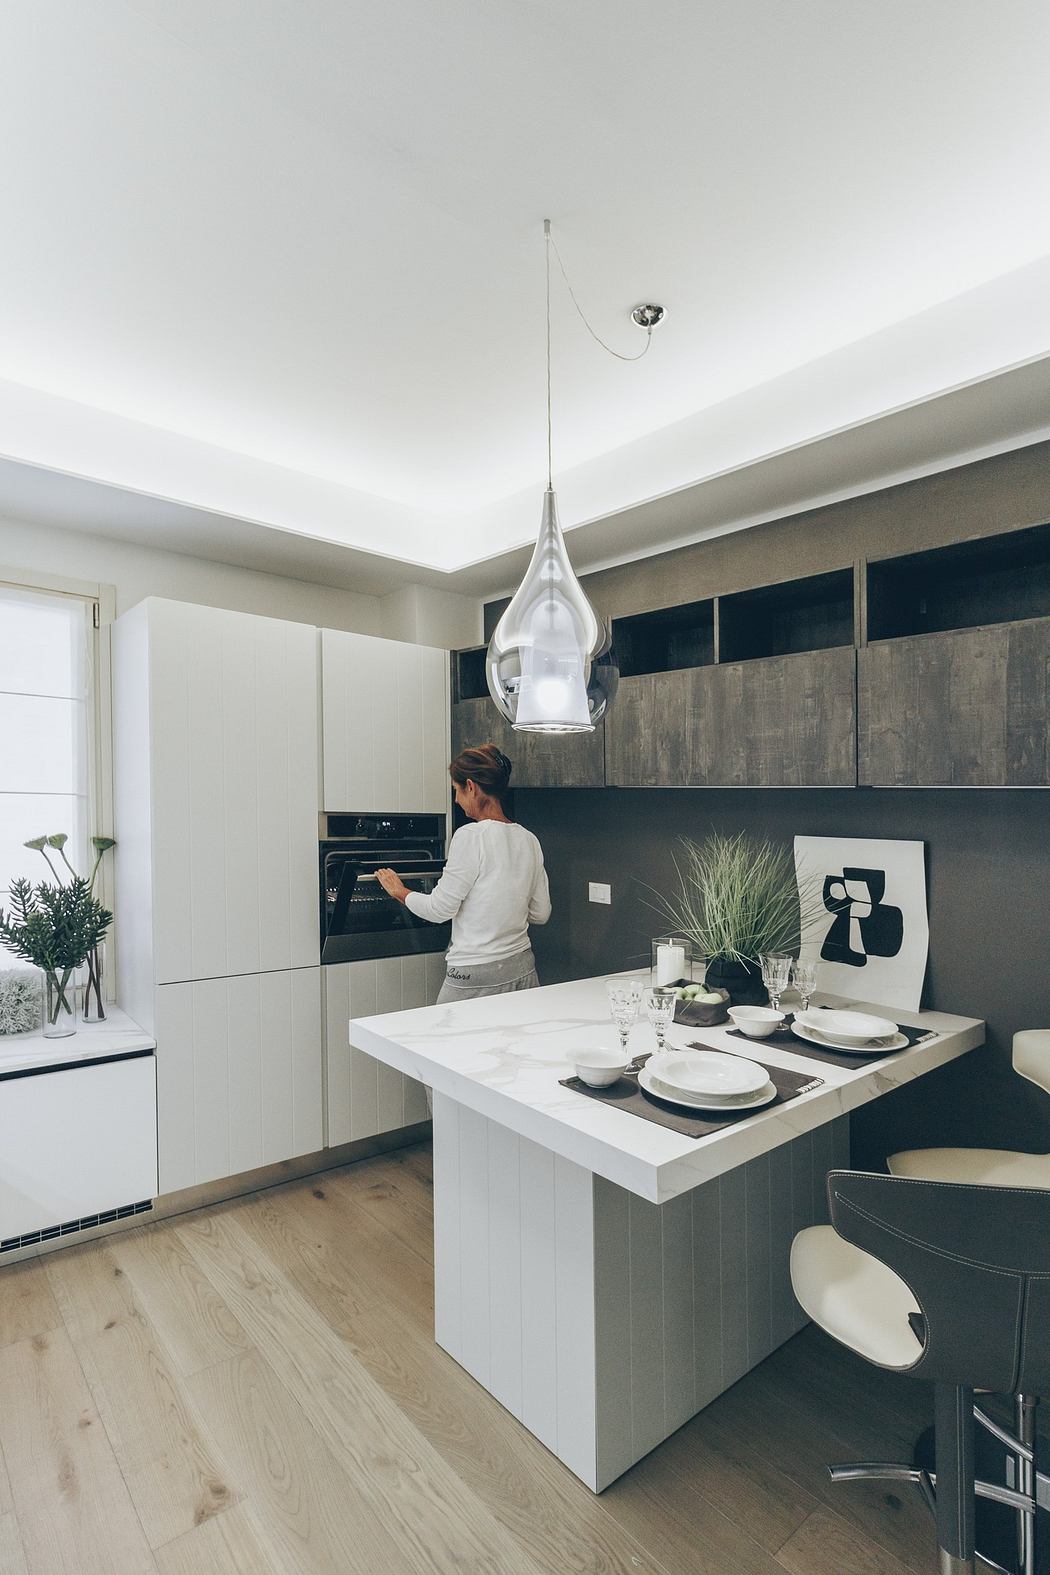 Contemporary kitchen with pendant light, white counters, and person cooking.